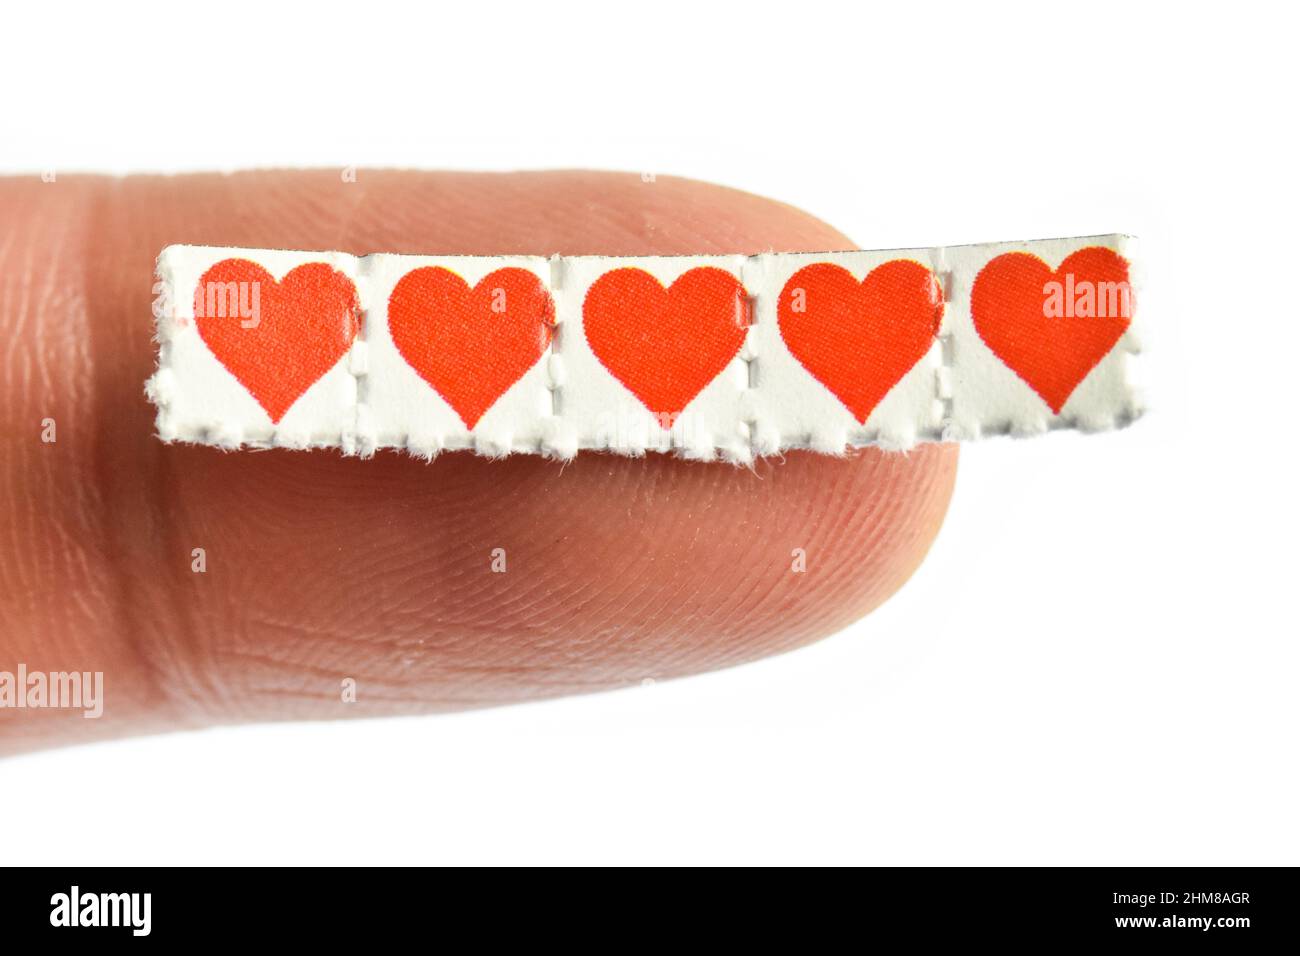 Love hearts trips,Blotting paper impregnated with the drug L.S.D.- Lysergic acid diethylamide. Stock Photo